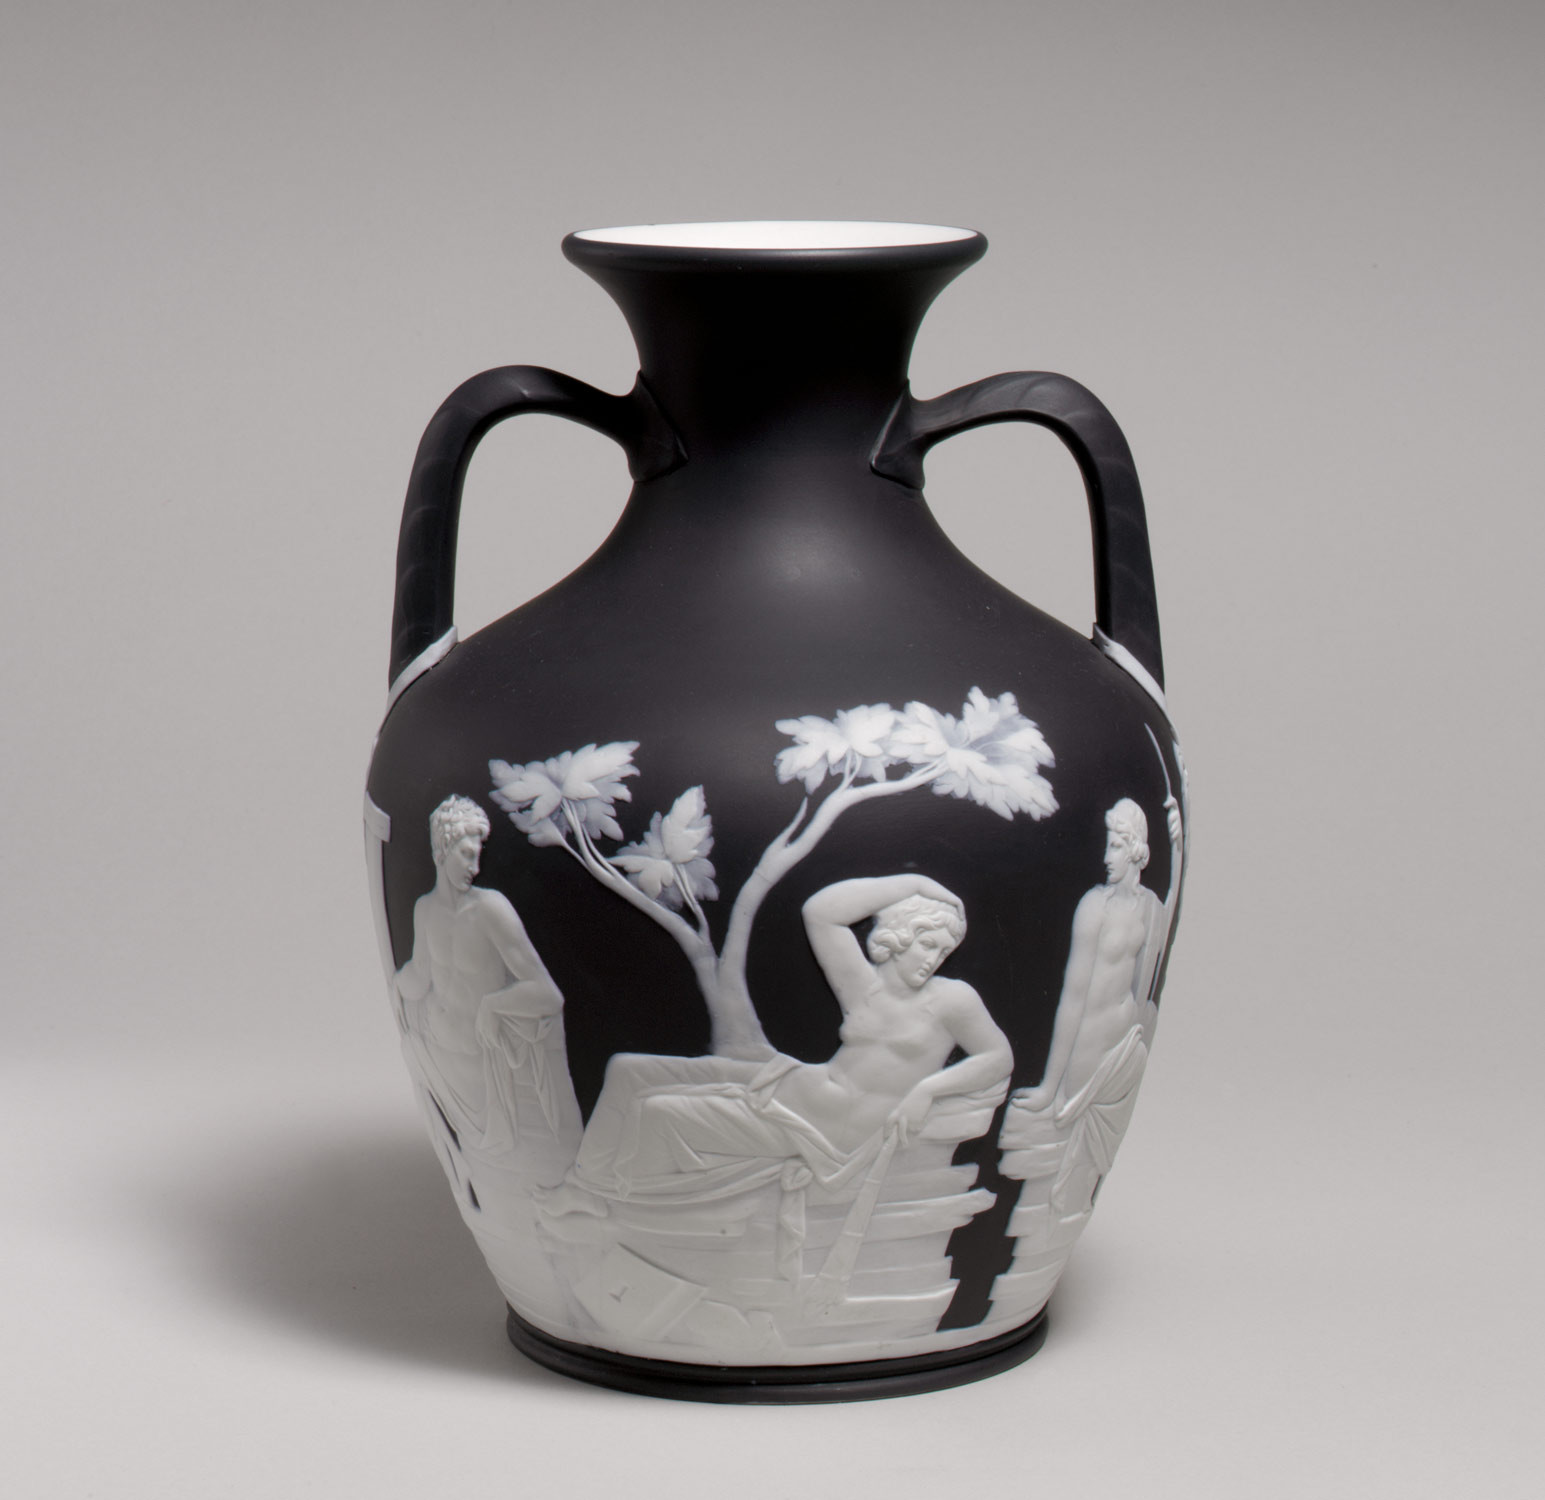 10 Famous Wedgwood Vases for Sale 2024 free download wedgwood vases for sale of portland pottery paintings within a3204c83b87ce1f839fe1af5299a96dc